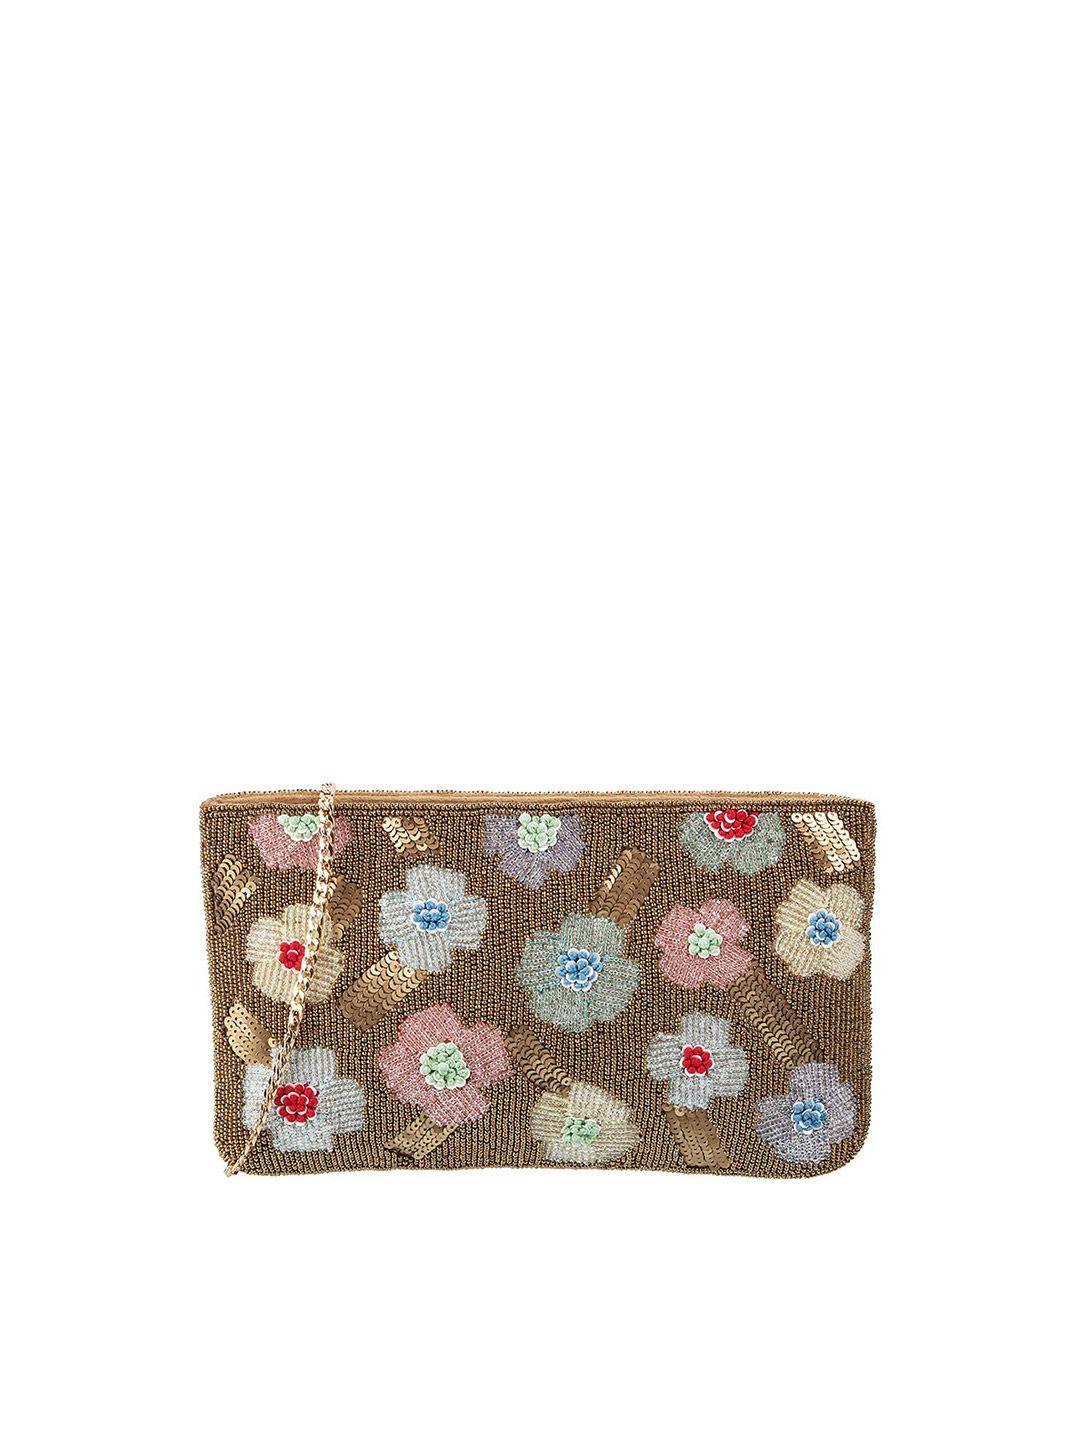 metro gold-toned & blue embellished purse clutch